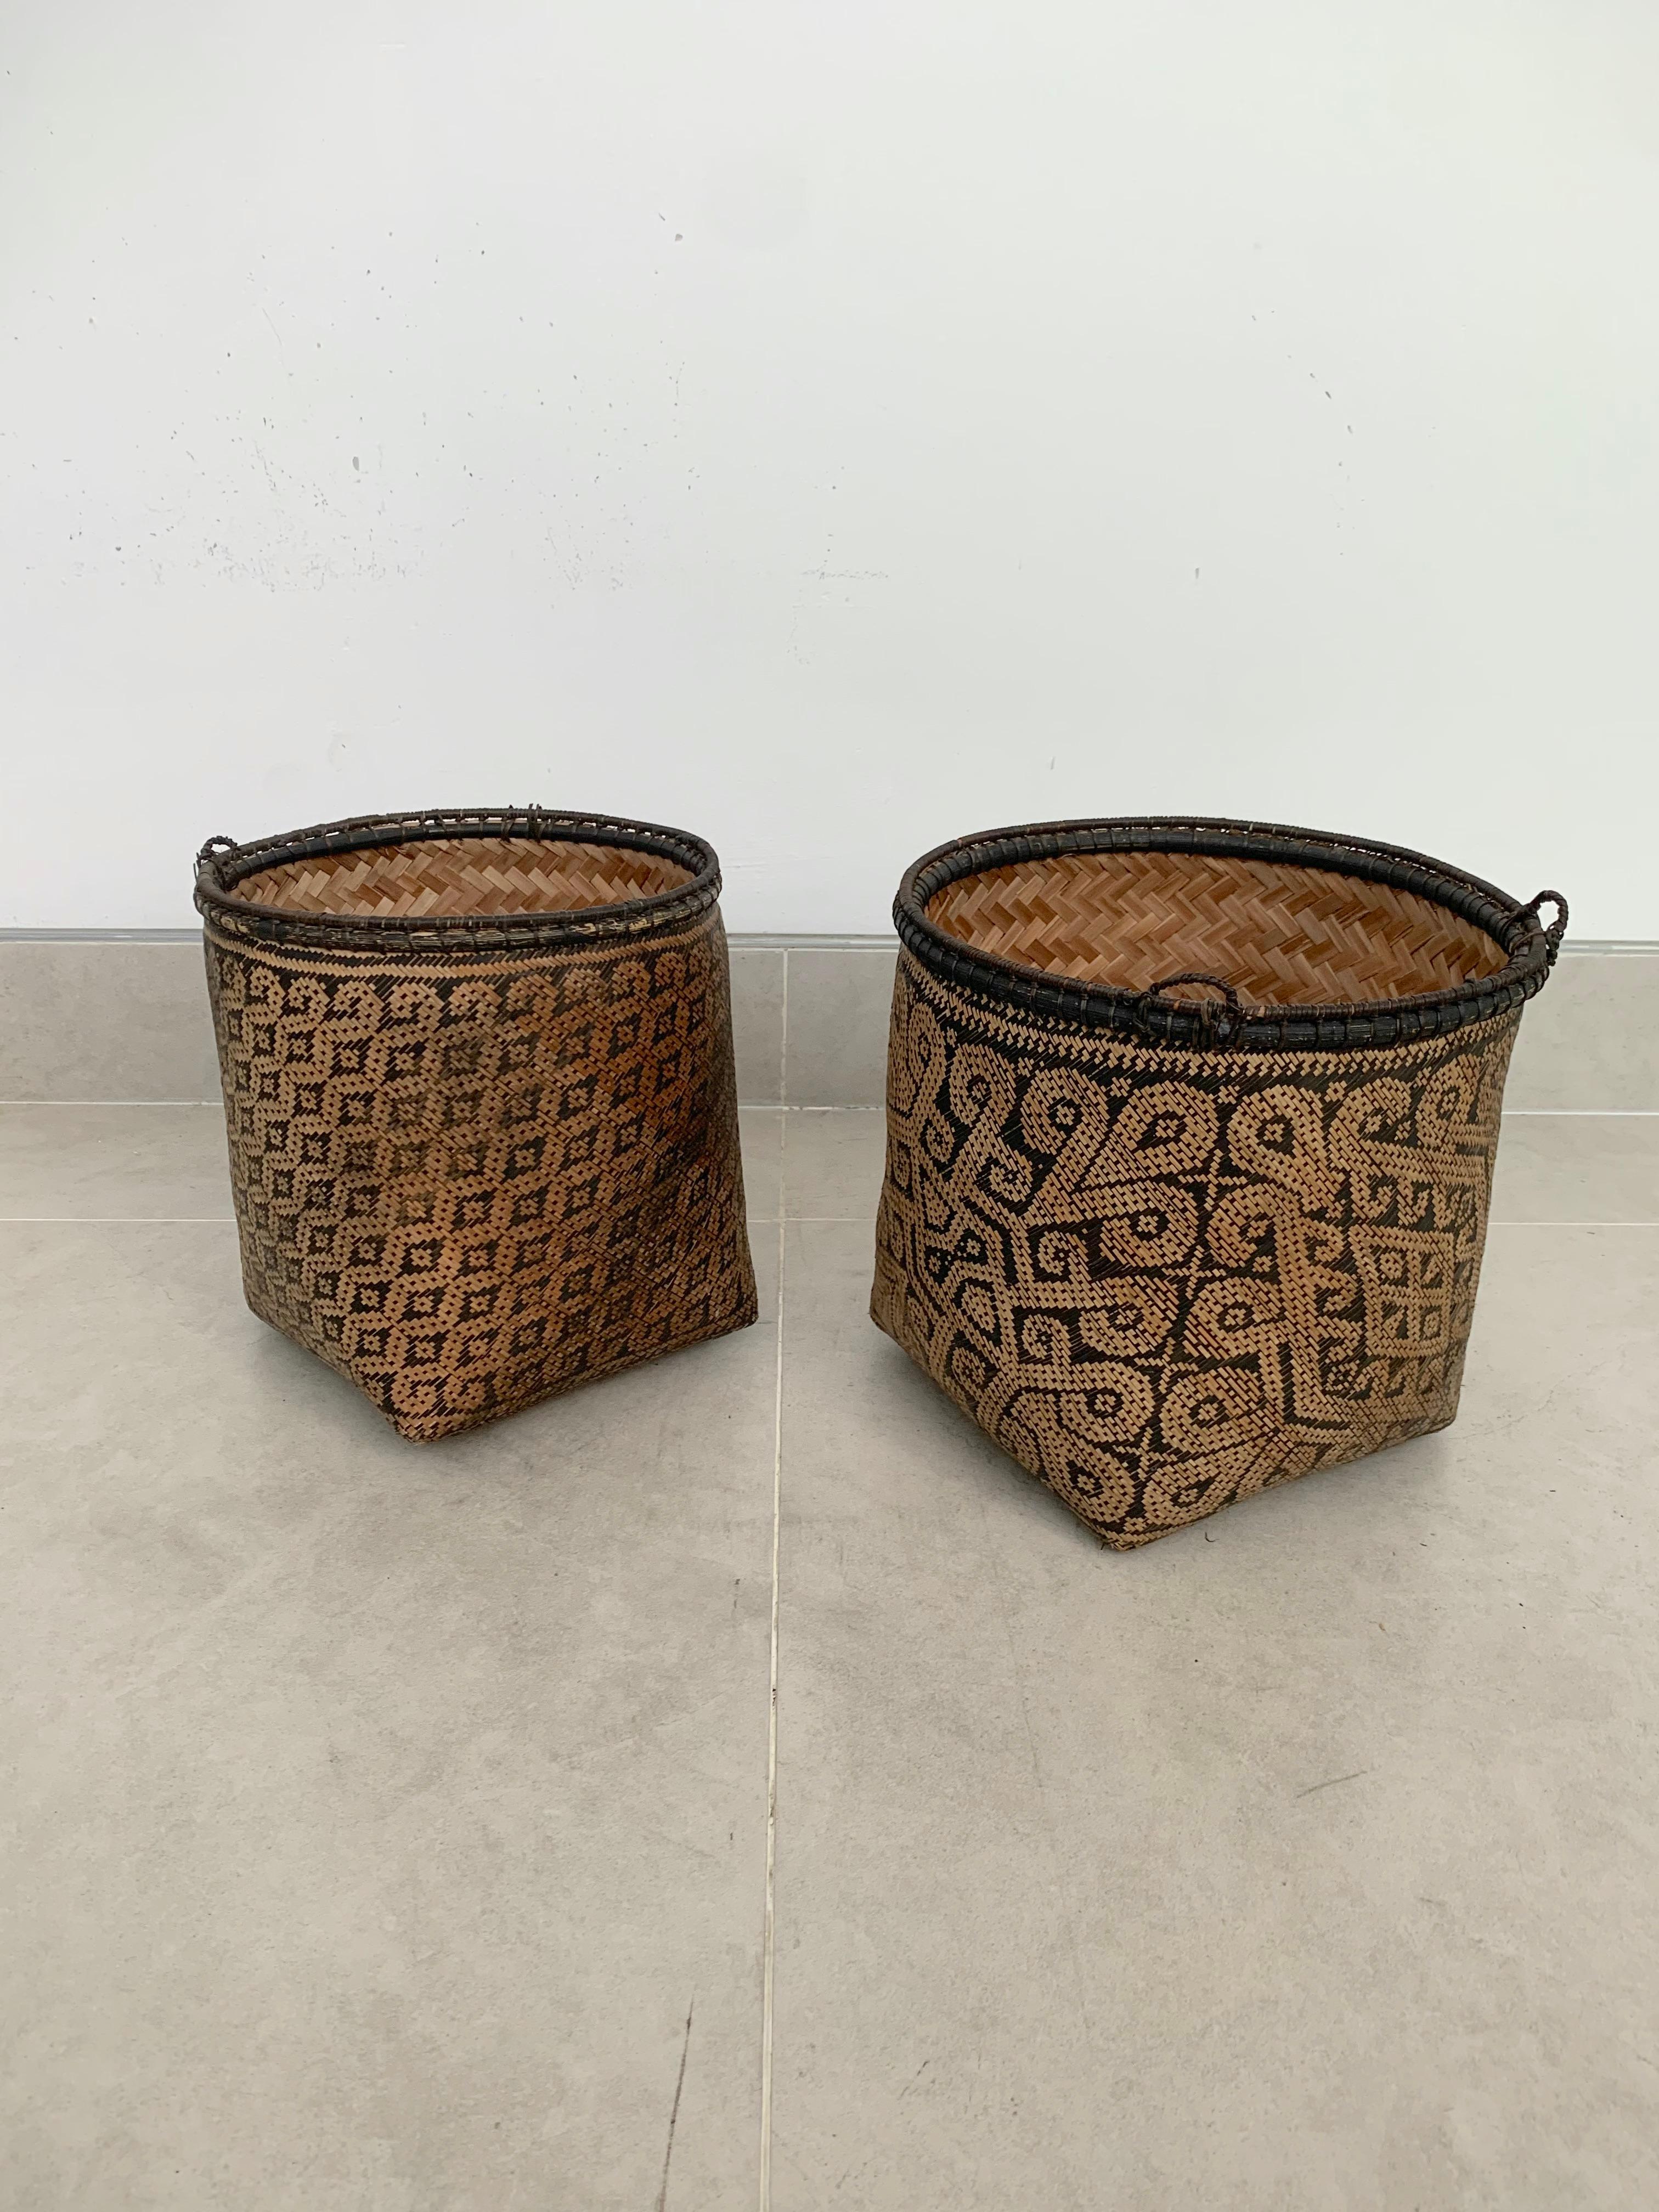 These vintage hand-woven baskets, circa year 2008 originate from the Dayak tribe of Borneo. Crafted with rattan fibres, these baskets were used to carry leaves, fruit, grain and wood and features wonderfully aged fibres and wood patina. These